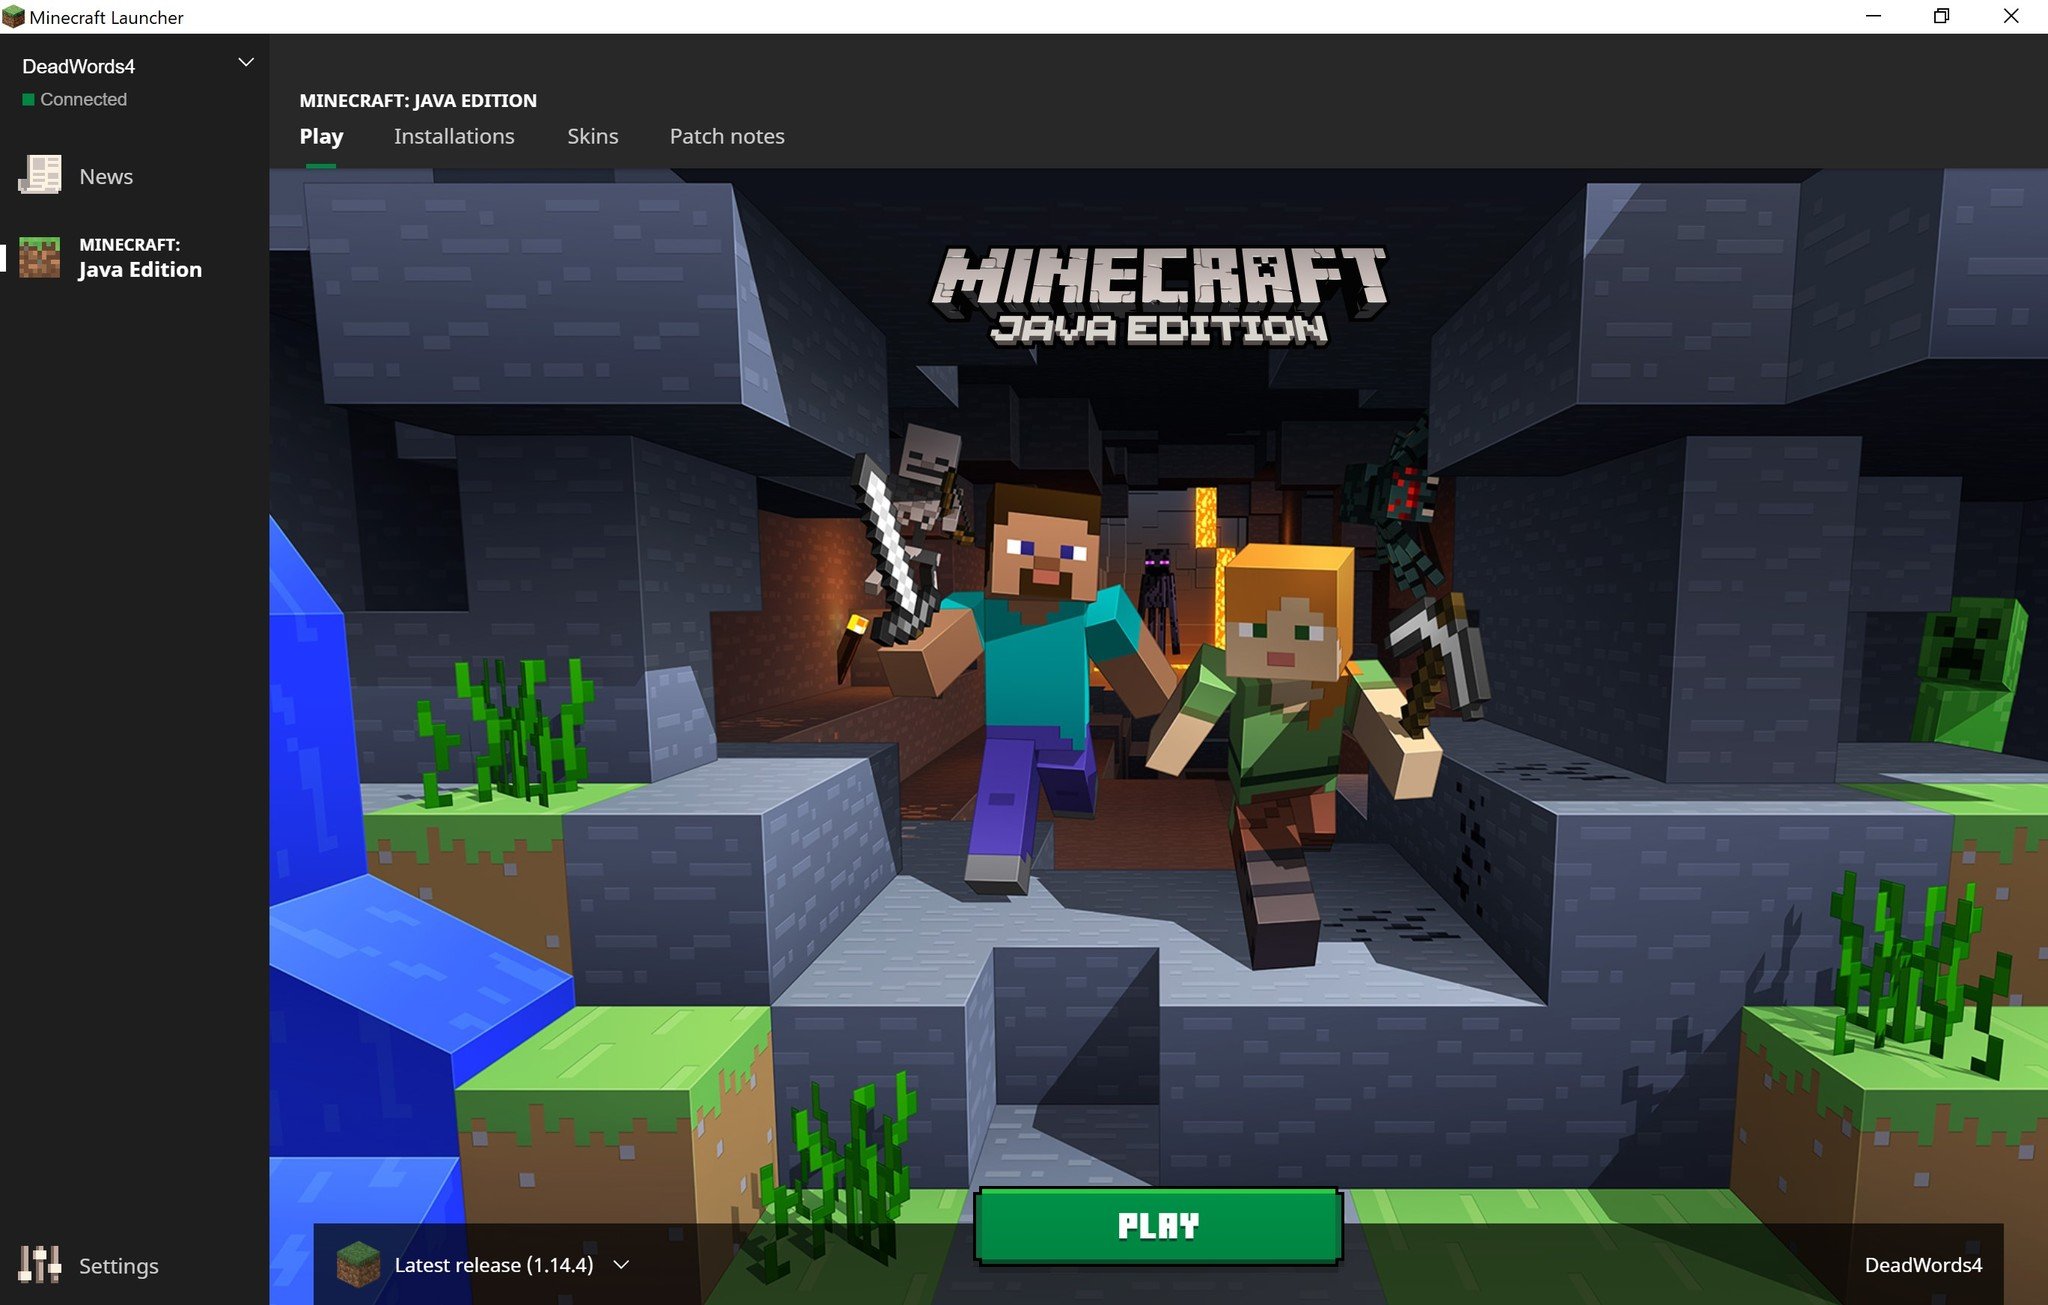 How to join the beta for Minecraft: Java Edition